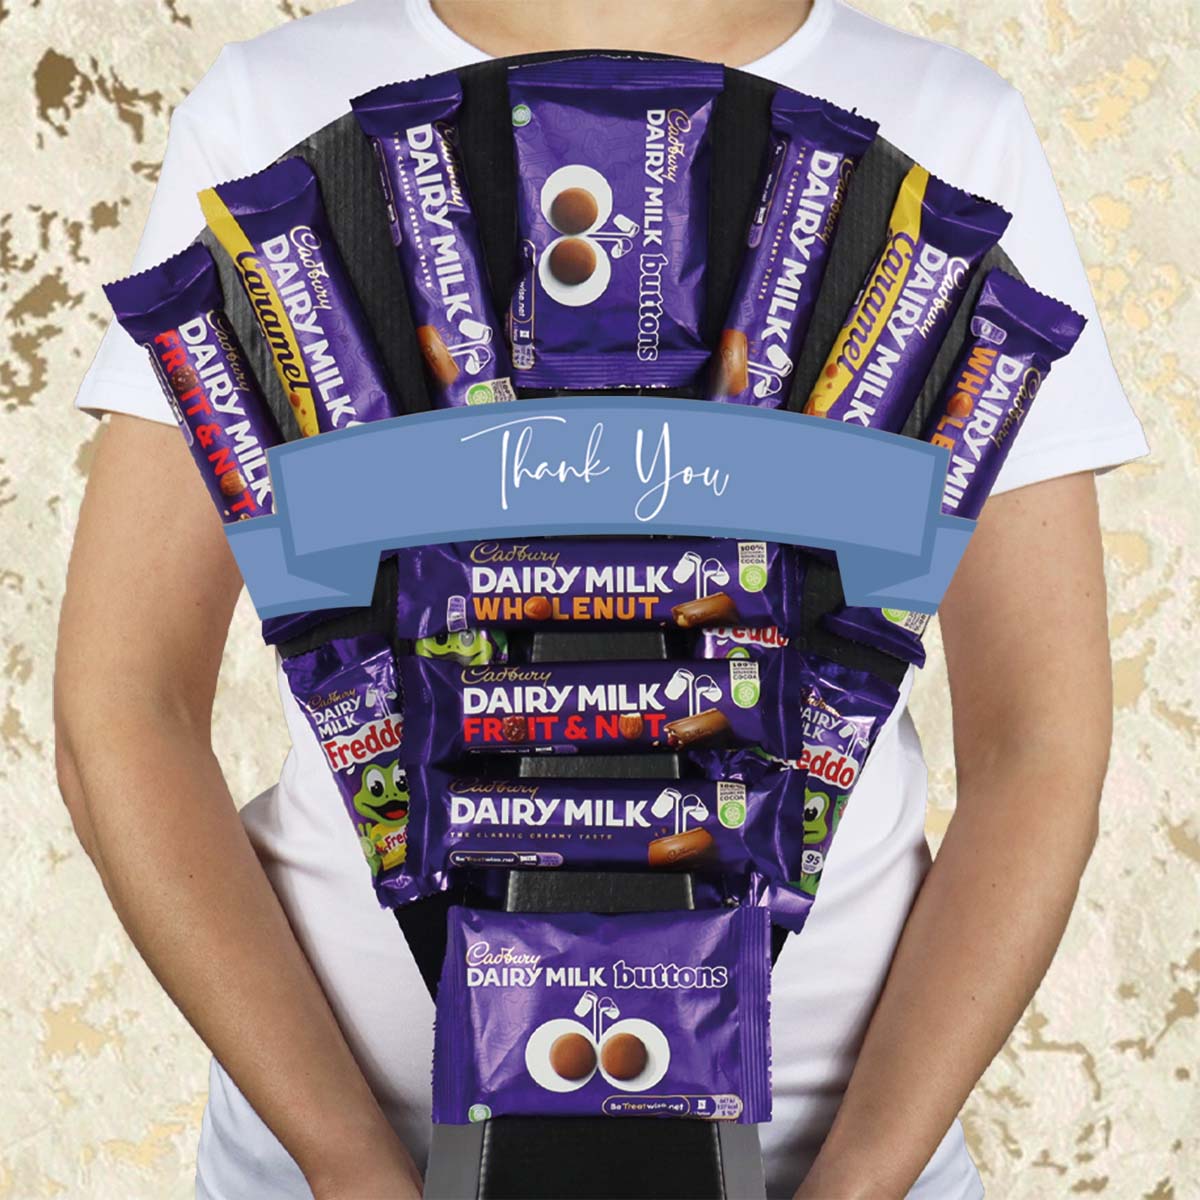 Large Dairy Milk Selection Thank You Chocolate Bouquet - Perfect Way To Show Appreciation - Gift Hamper Box by HamperWell